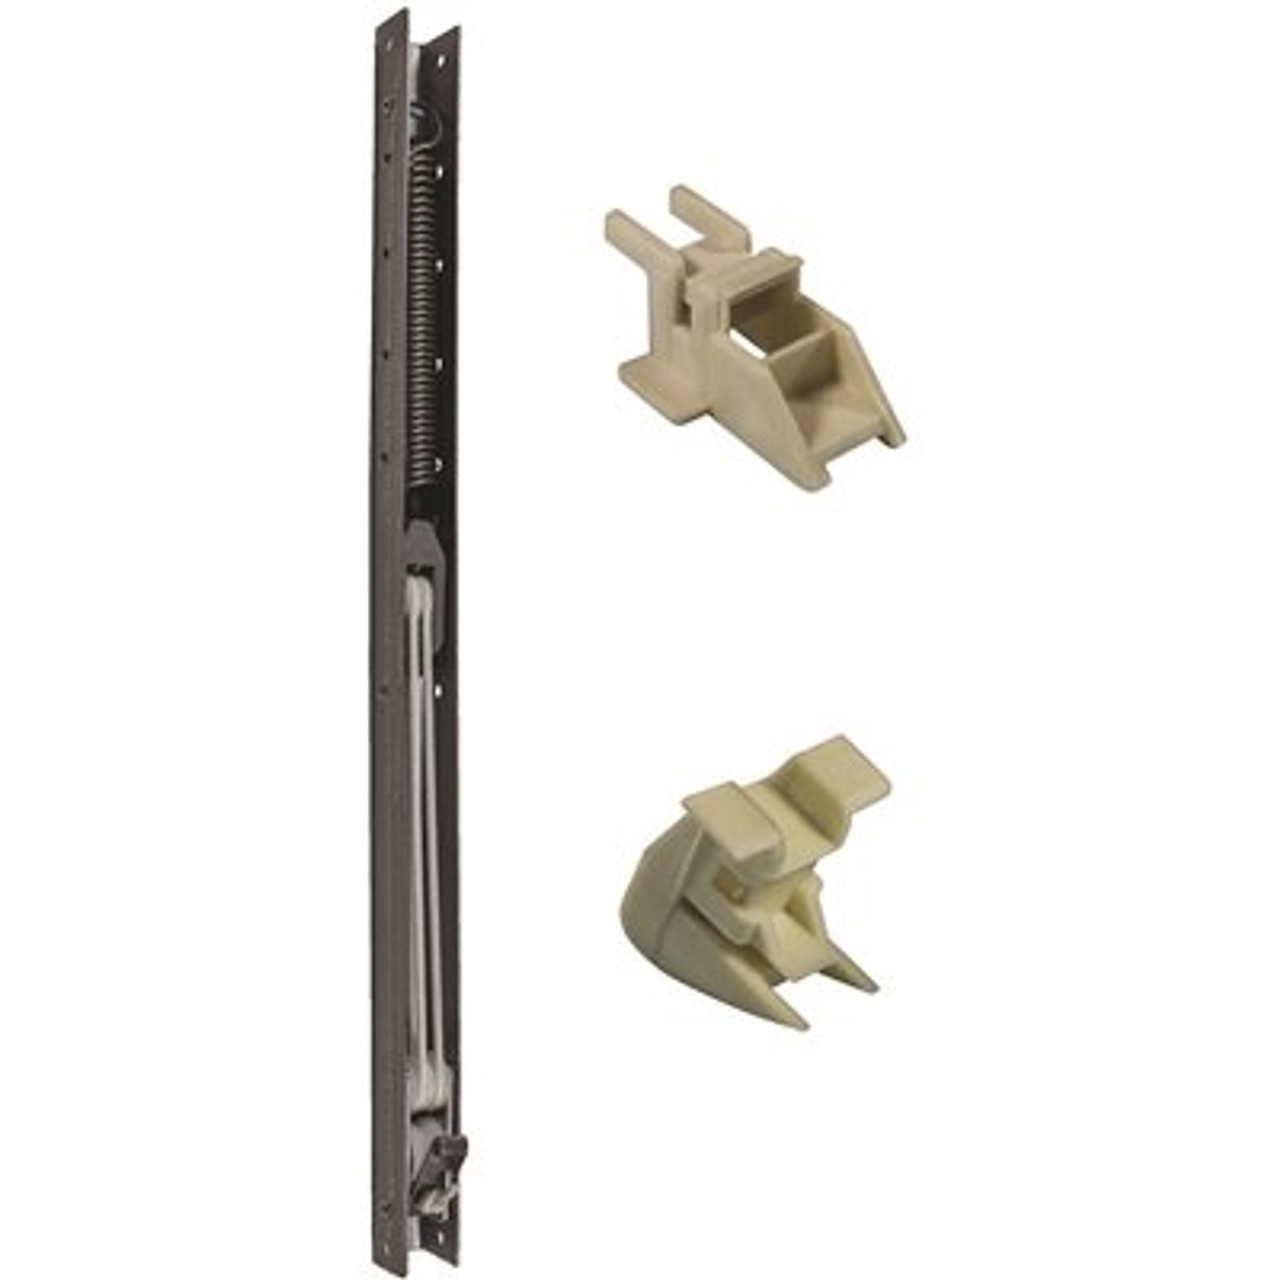 24 In. L Window Channel Balance 2310 With 9/16 In. W X 5/8 In. D Top And Bottom End Brackets Attached - 314413439